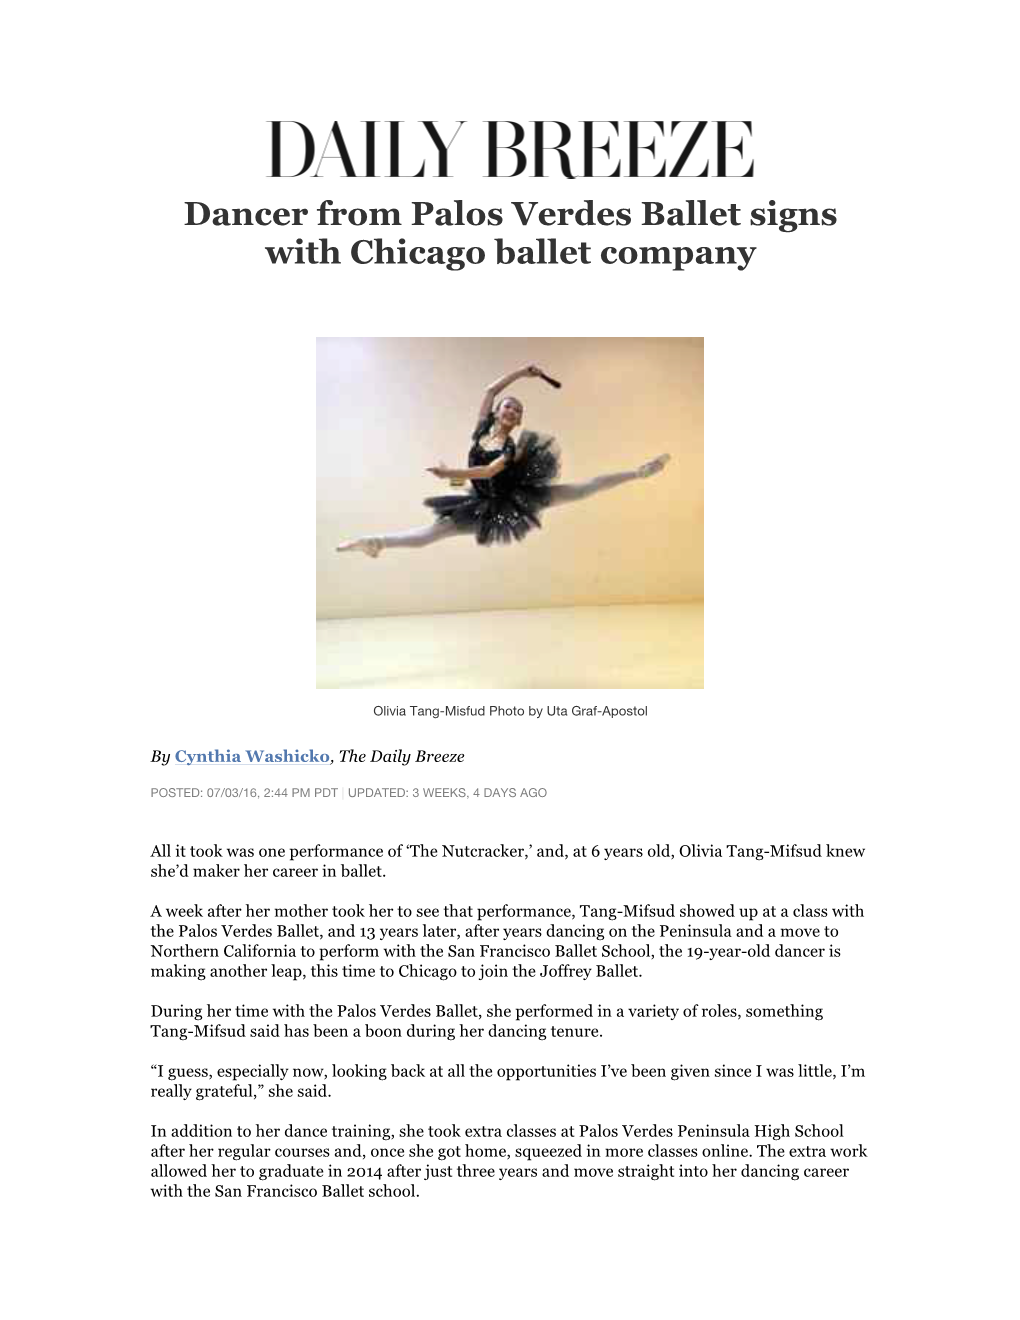 Dancer from Palos Verdes Ballet Signs with Chicago Ballet Company